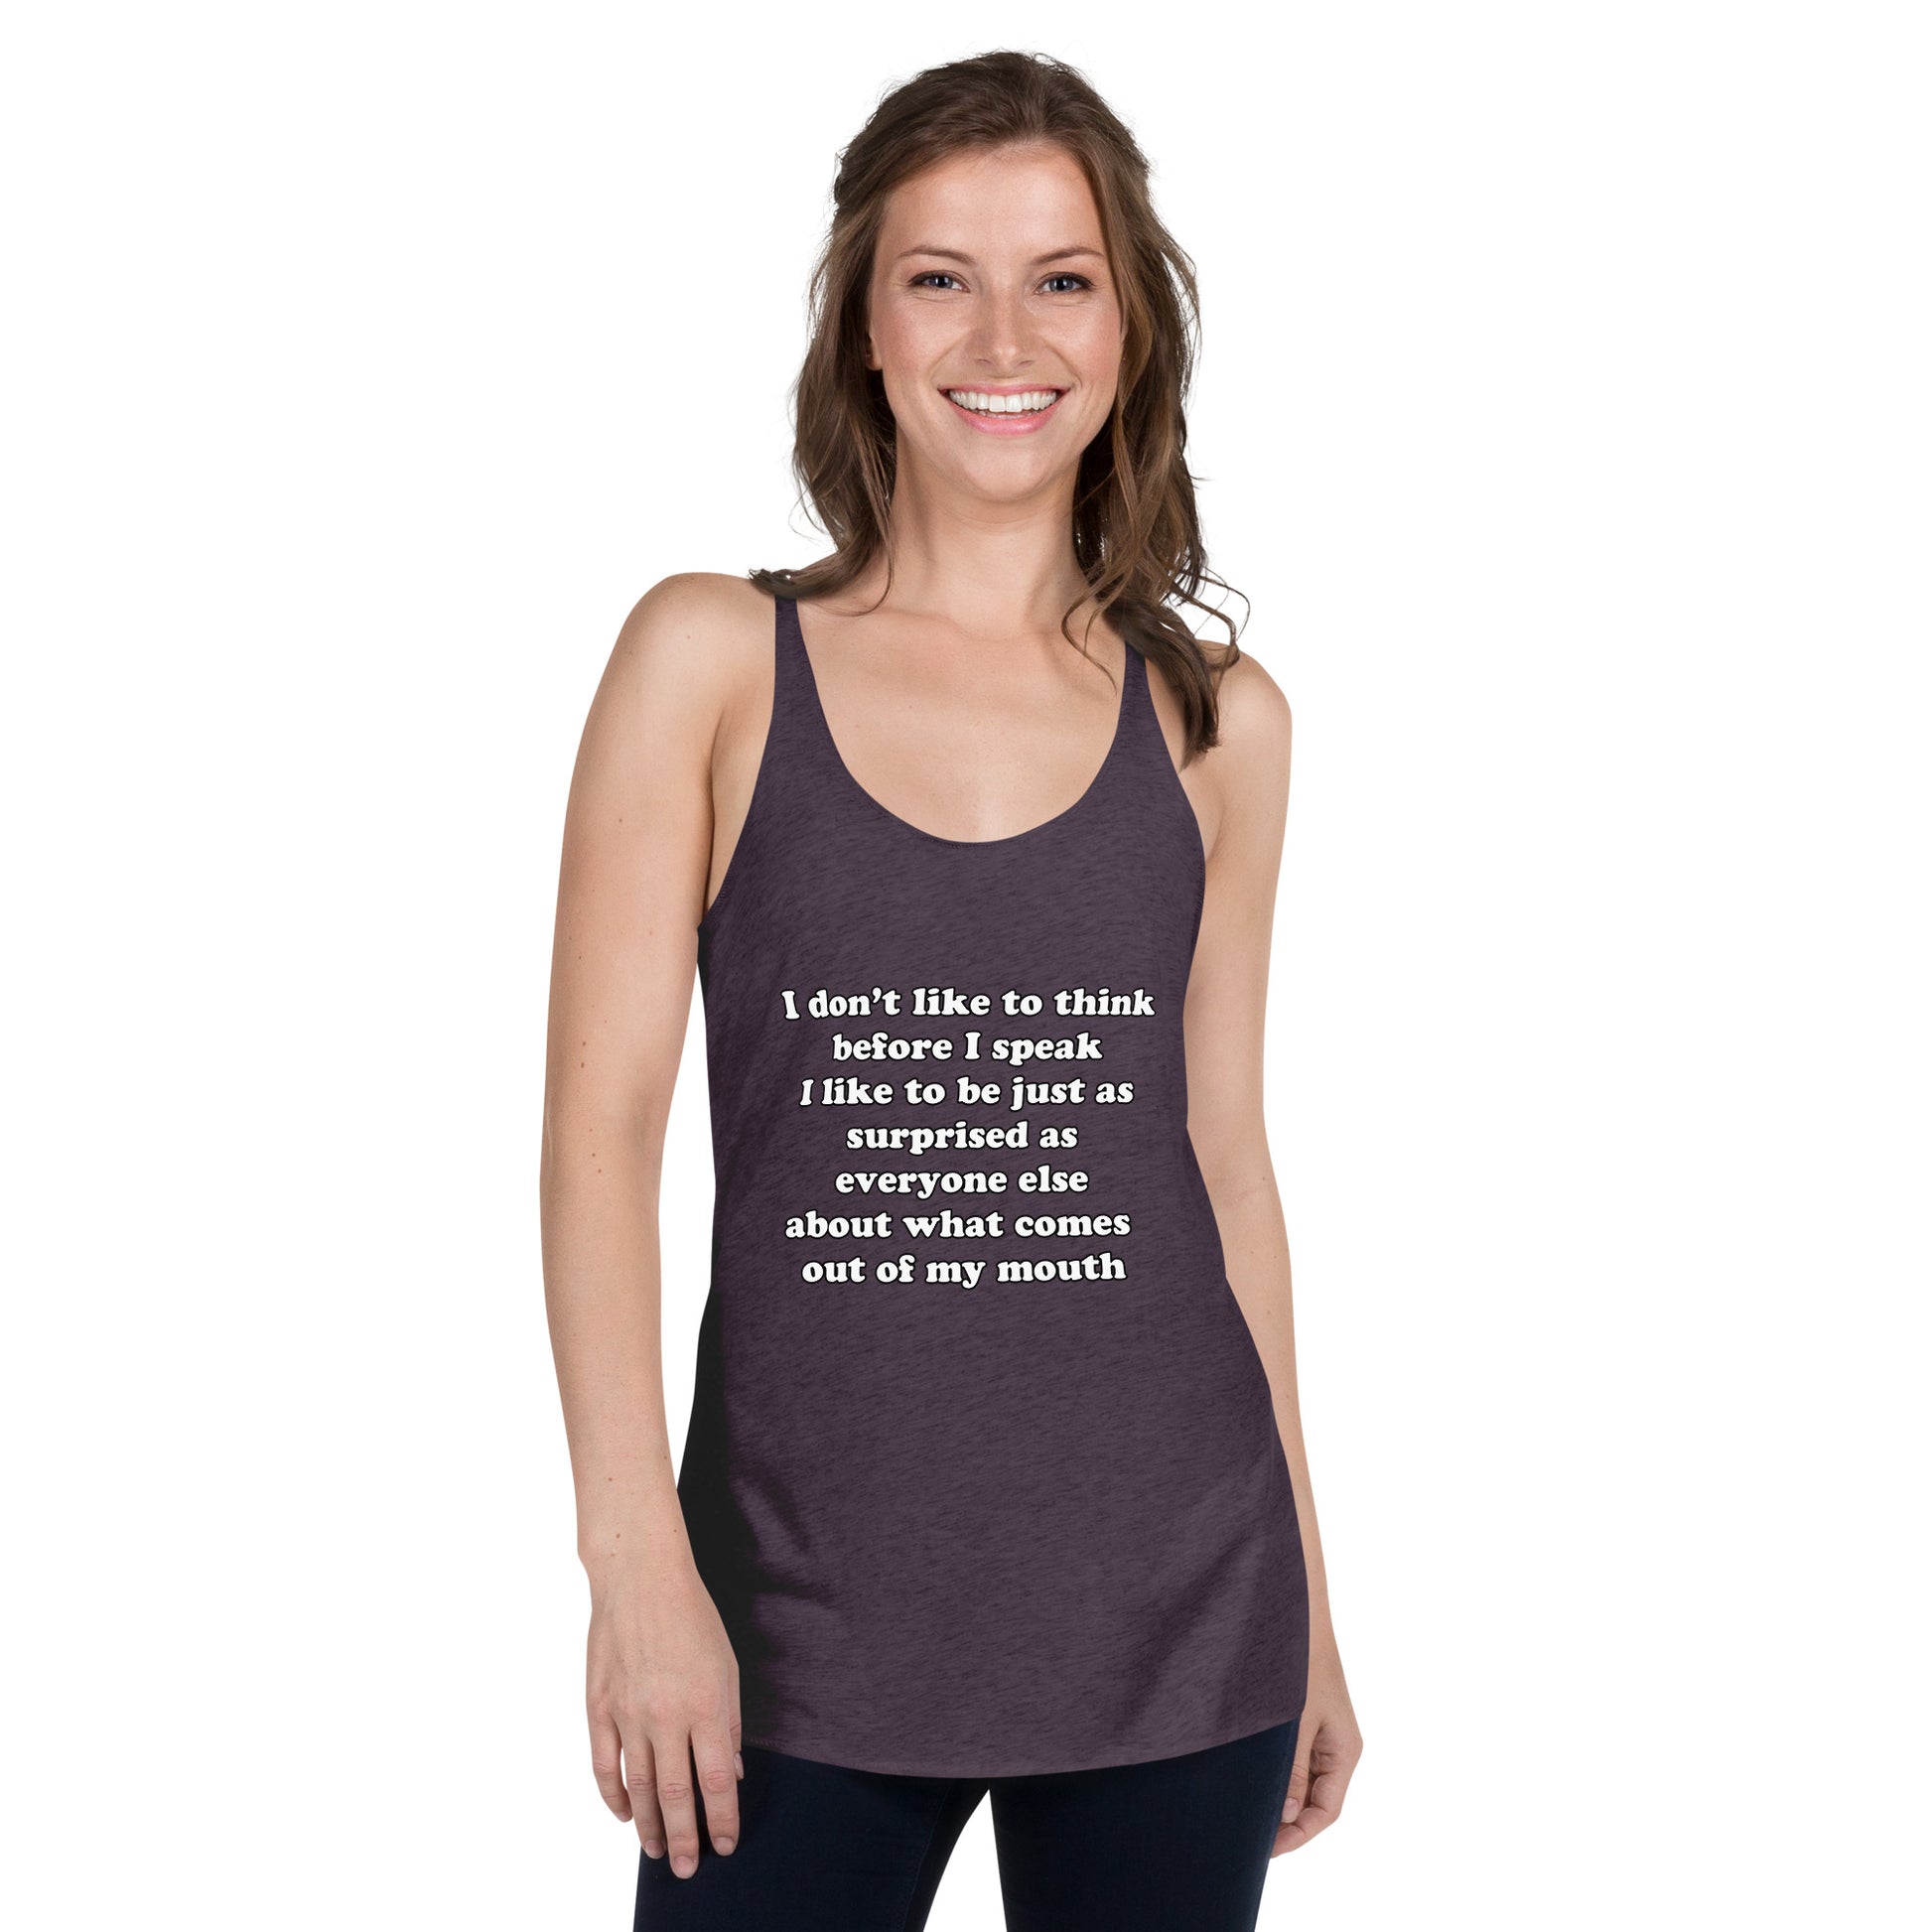 Woman with purple tank top with text “I don't think before I speak Just as serprised as everyone about what comes out of my mouth"